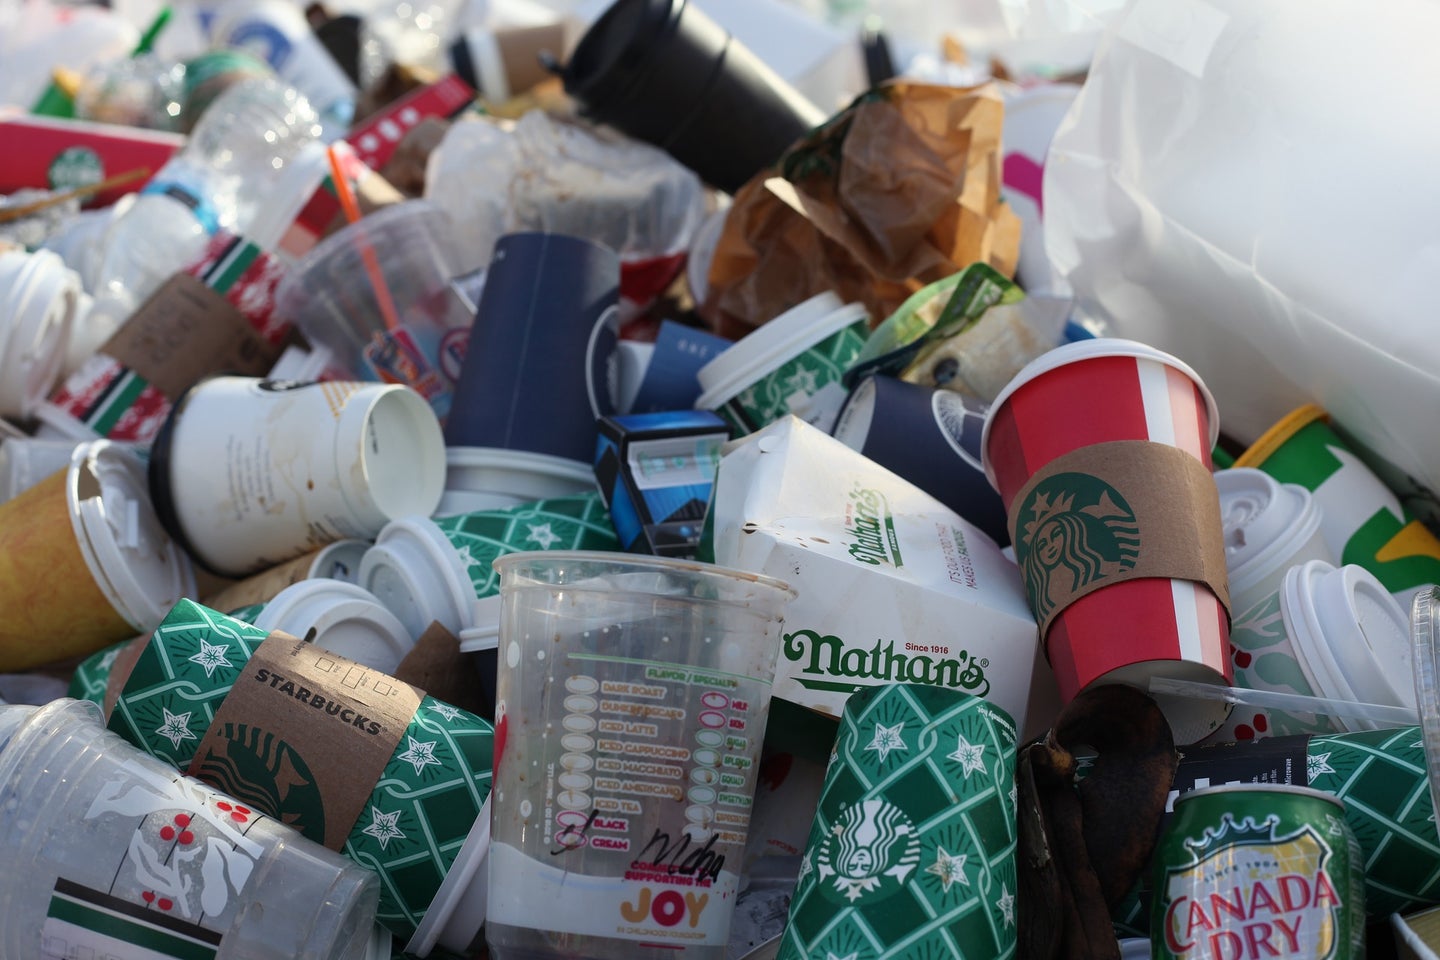 Empty cups, both plastic and paper, take out containers, straws, and other trash sit in a multi-colored pile. Starbucks, Nathans, Dunkin Donuts, and Canada Dry logos are visible on some of the items.